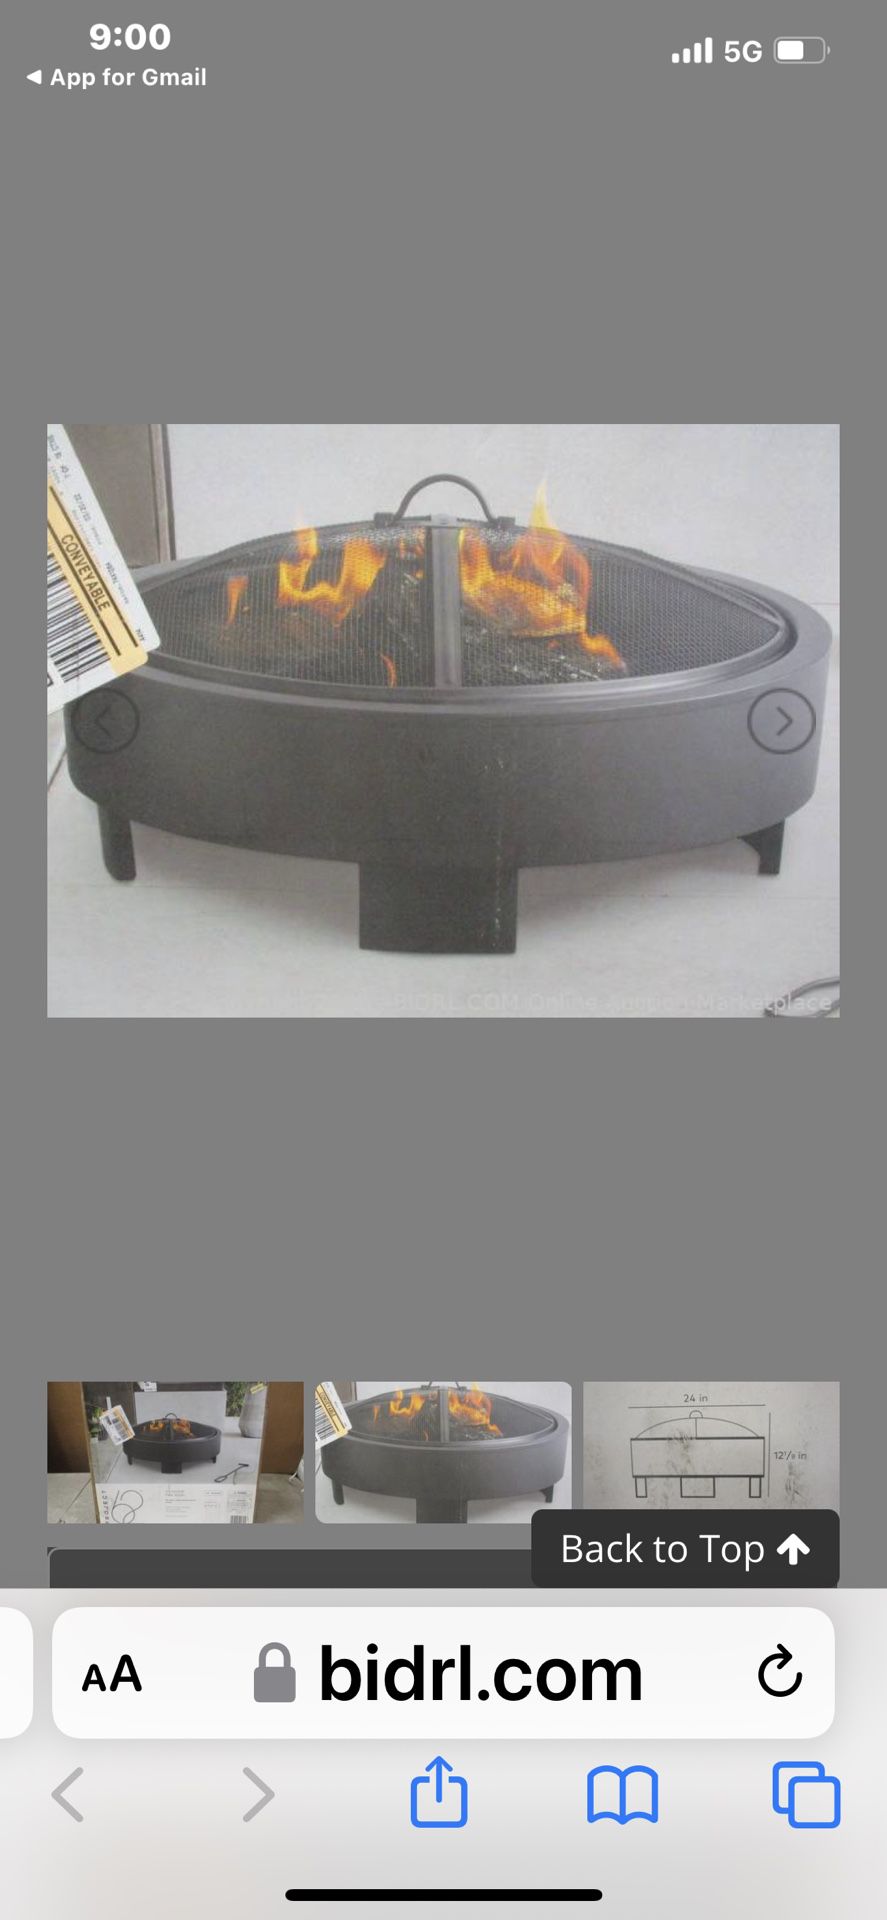 Brand new box never opened project 6226 inch fire pit